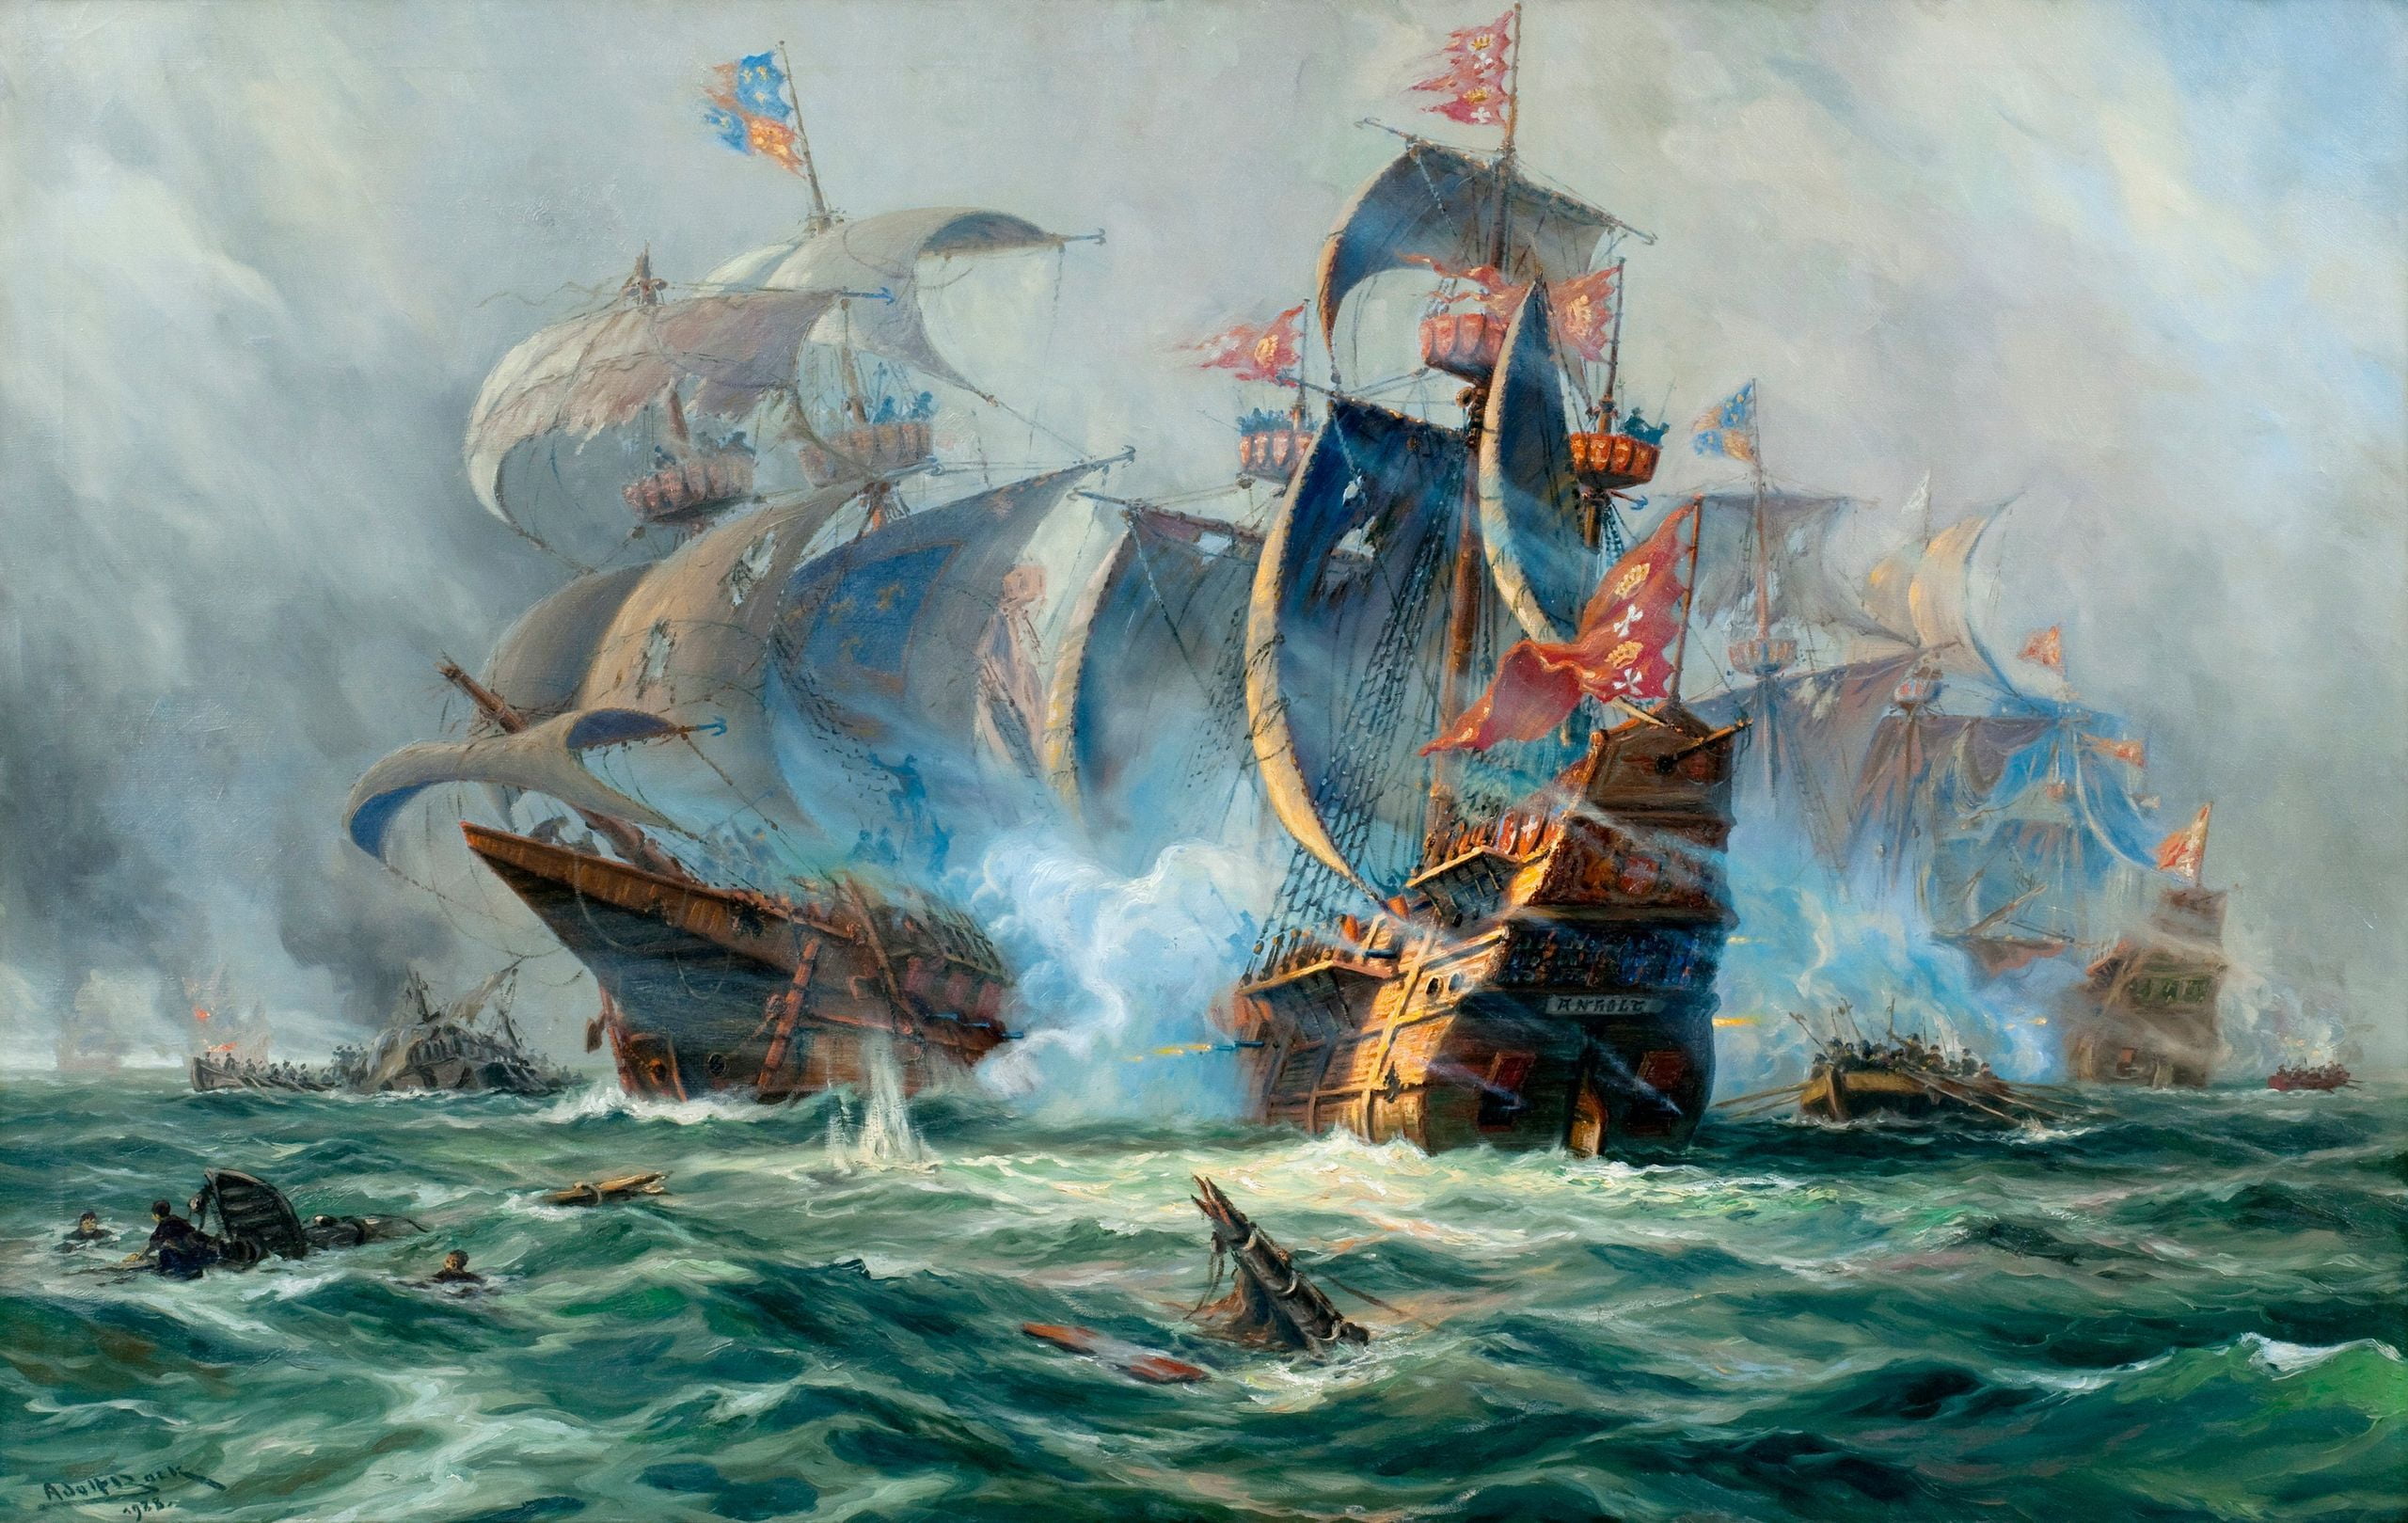 brown galleon painting, ships, picture, the battle, sailboats